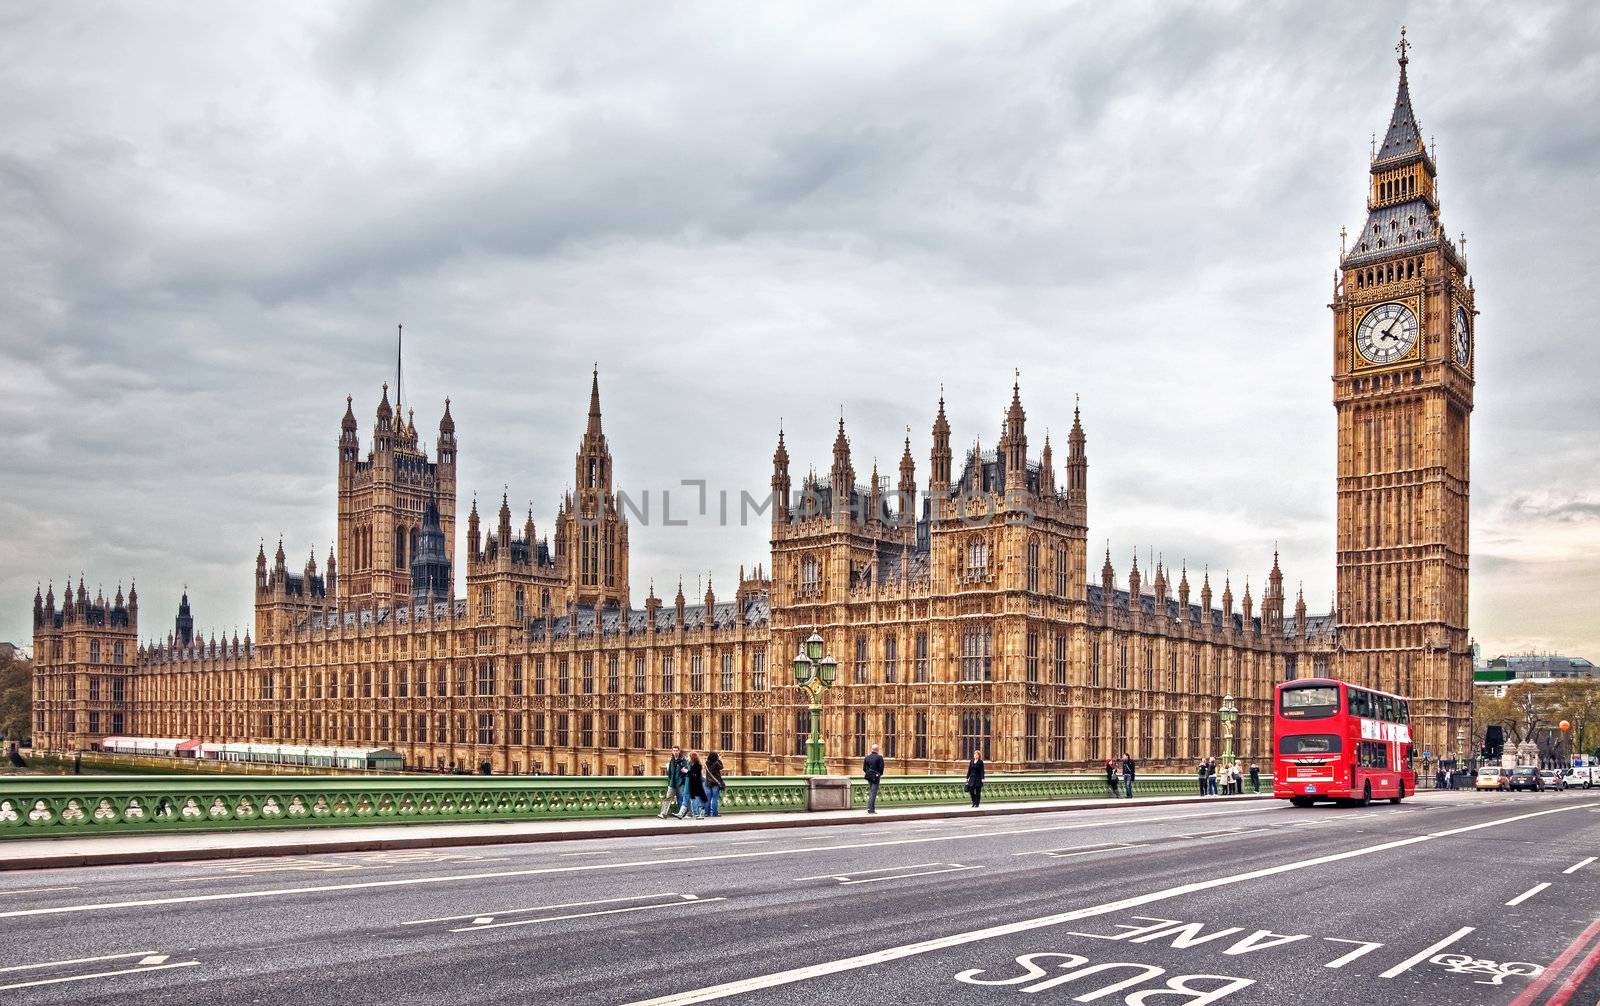 A photography of the Houses of Parliament in London UK